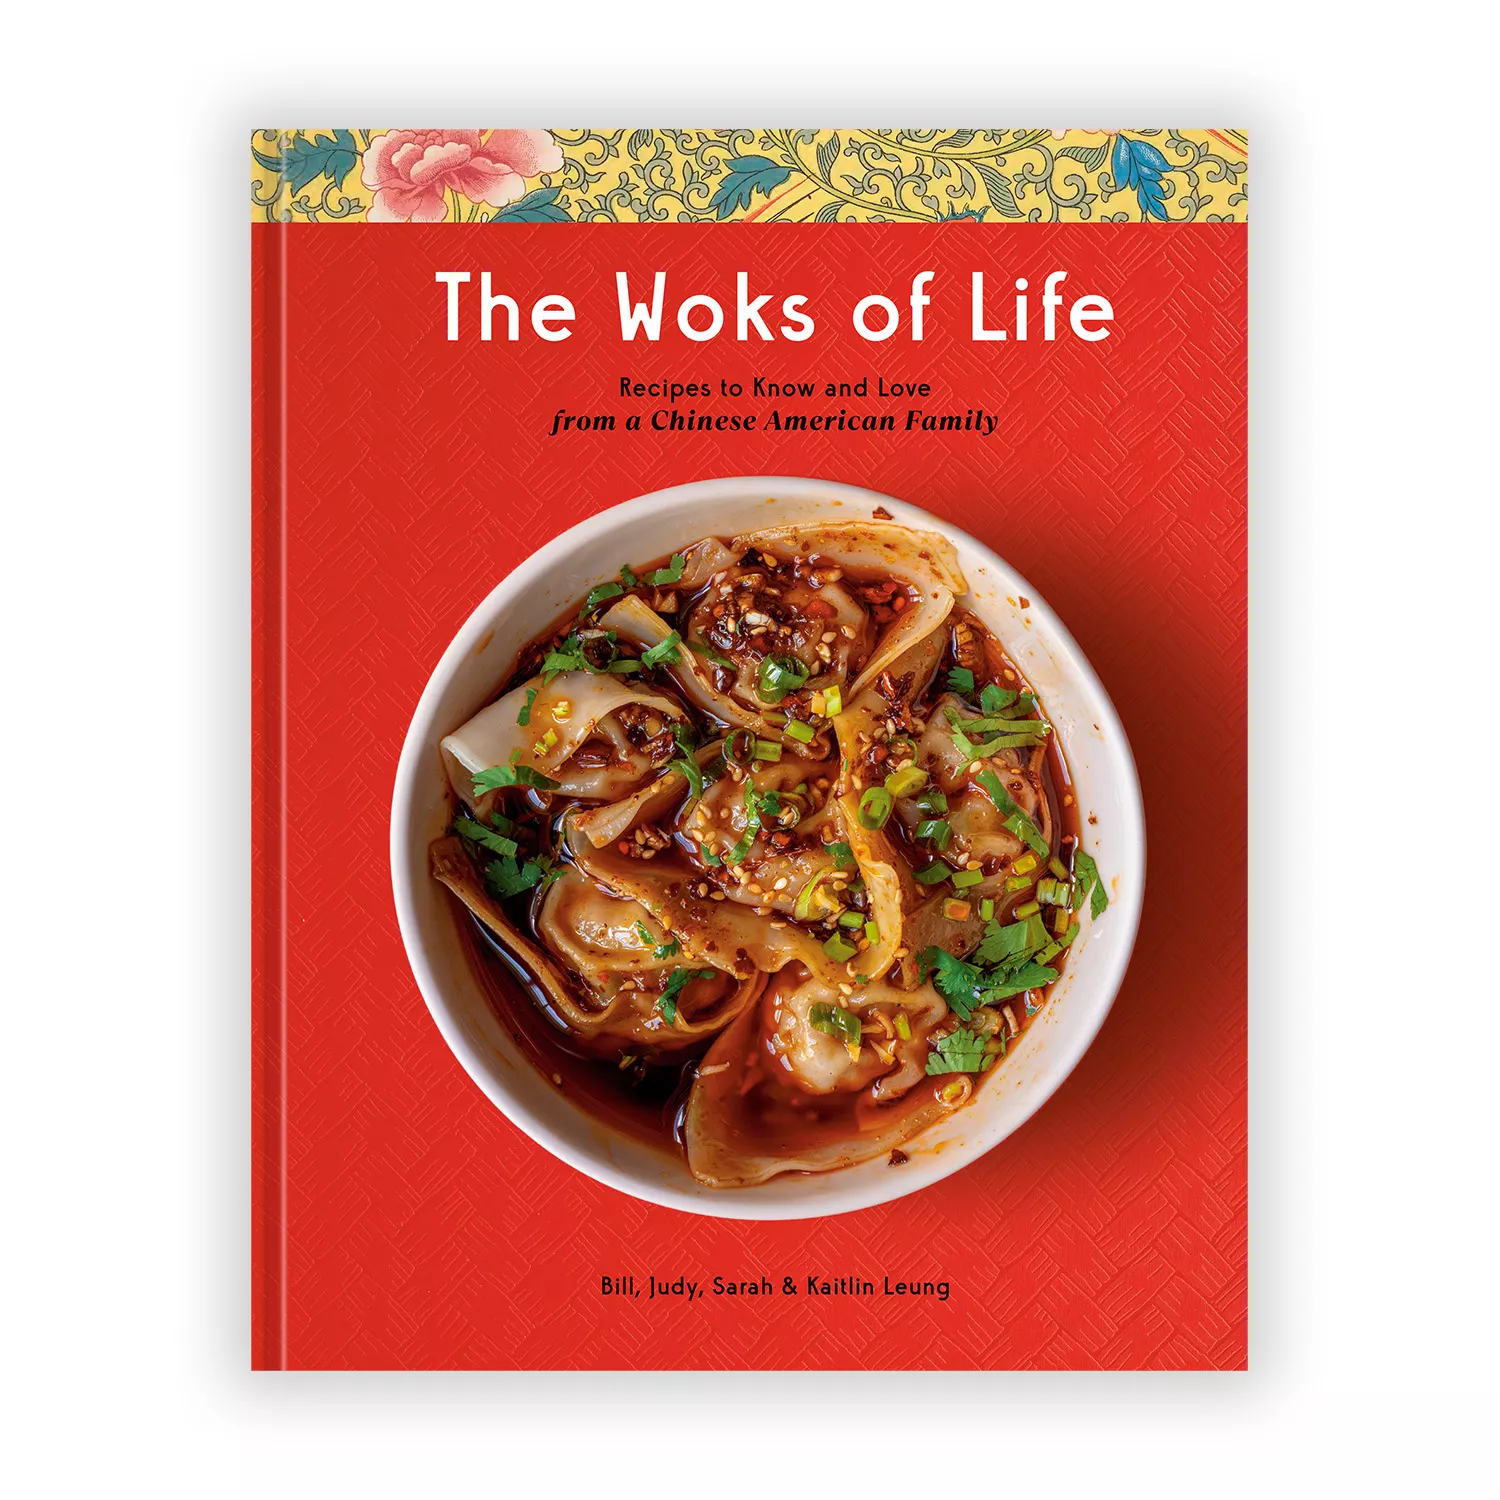 The Woks of Life: Recipes to Know & Love from a Chinese American Family